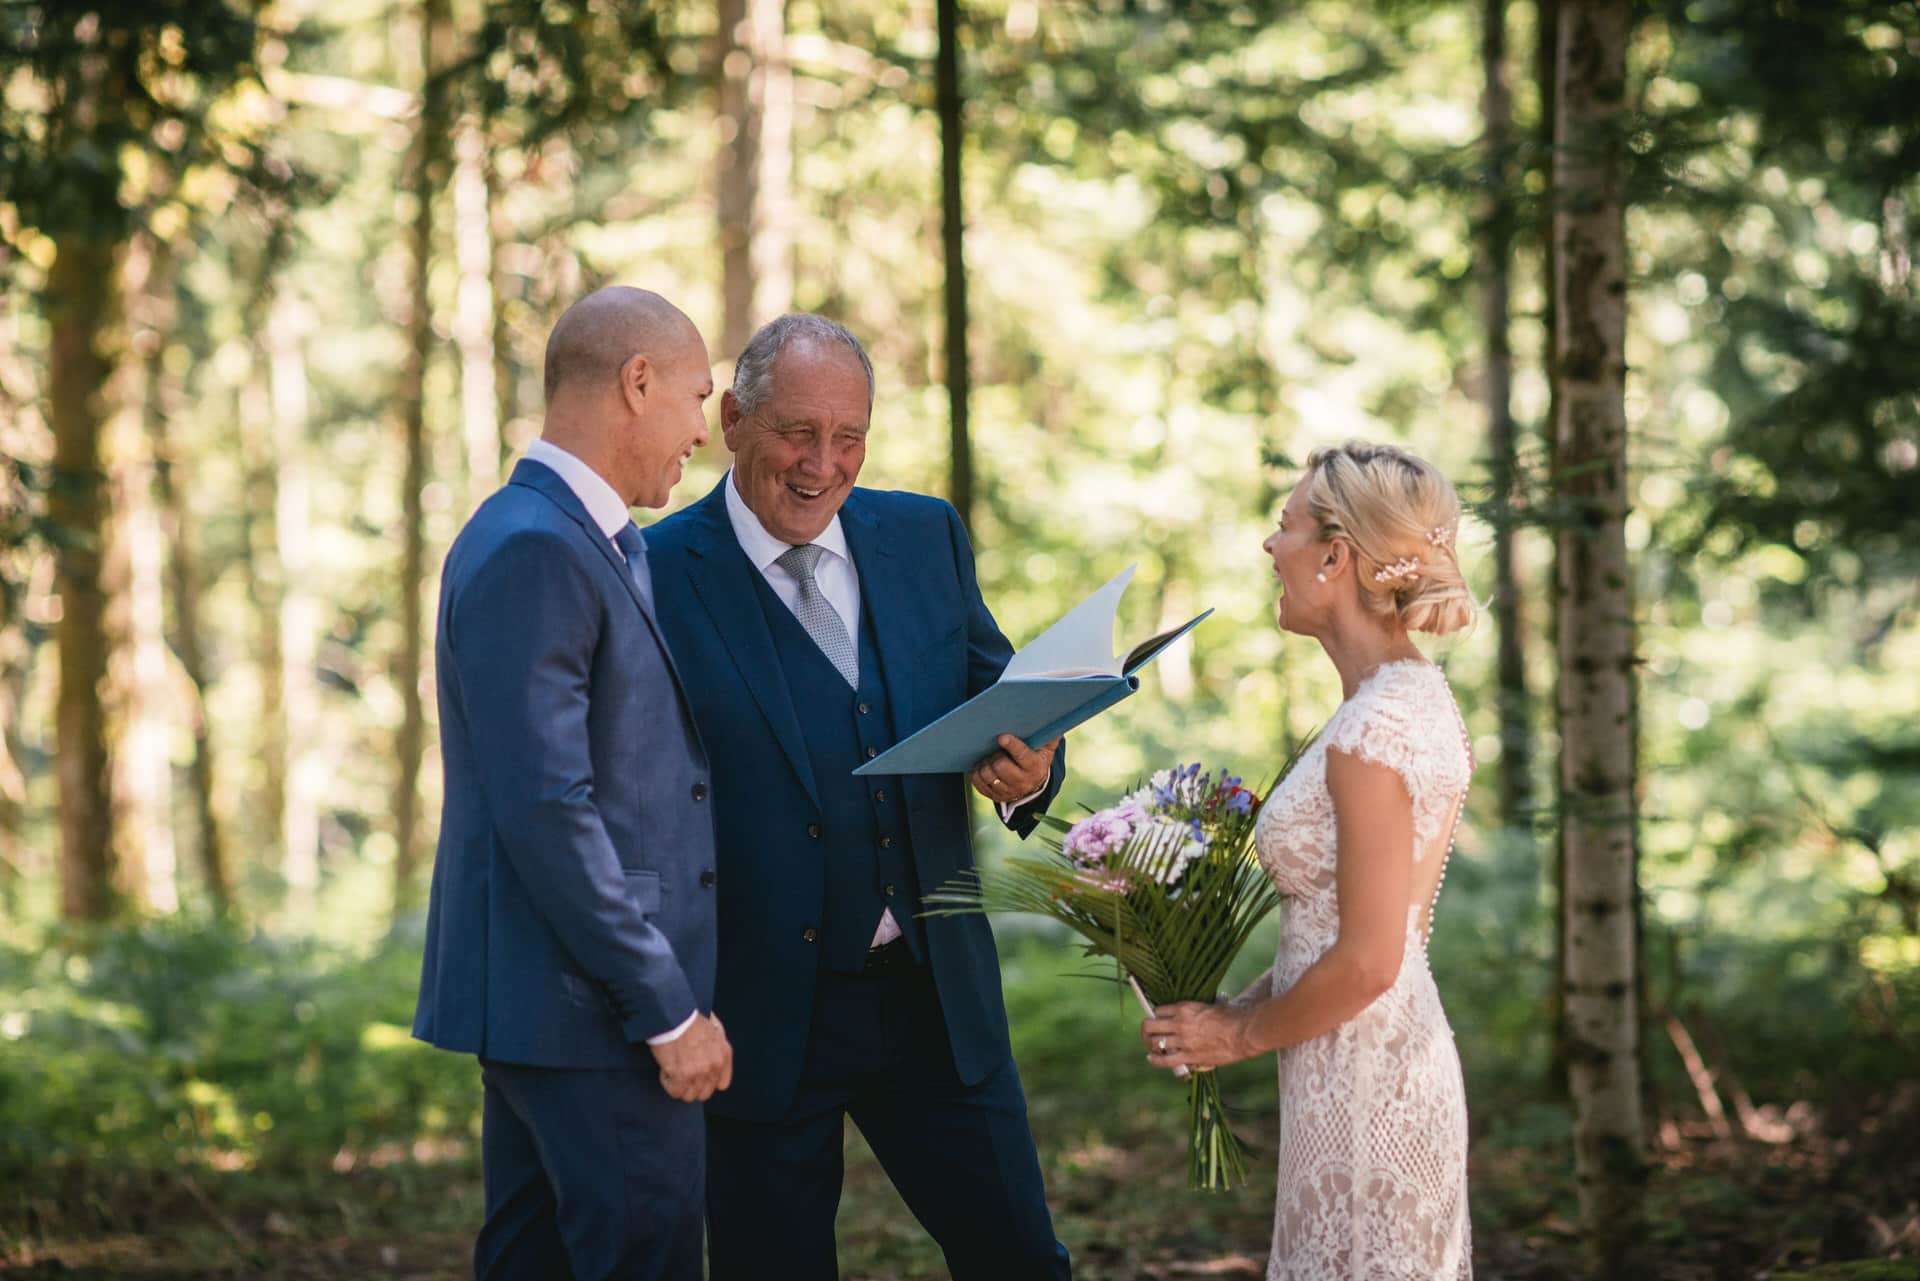 Celebrant showing his book to the bride and groom during their elopement ceremony in Central France